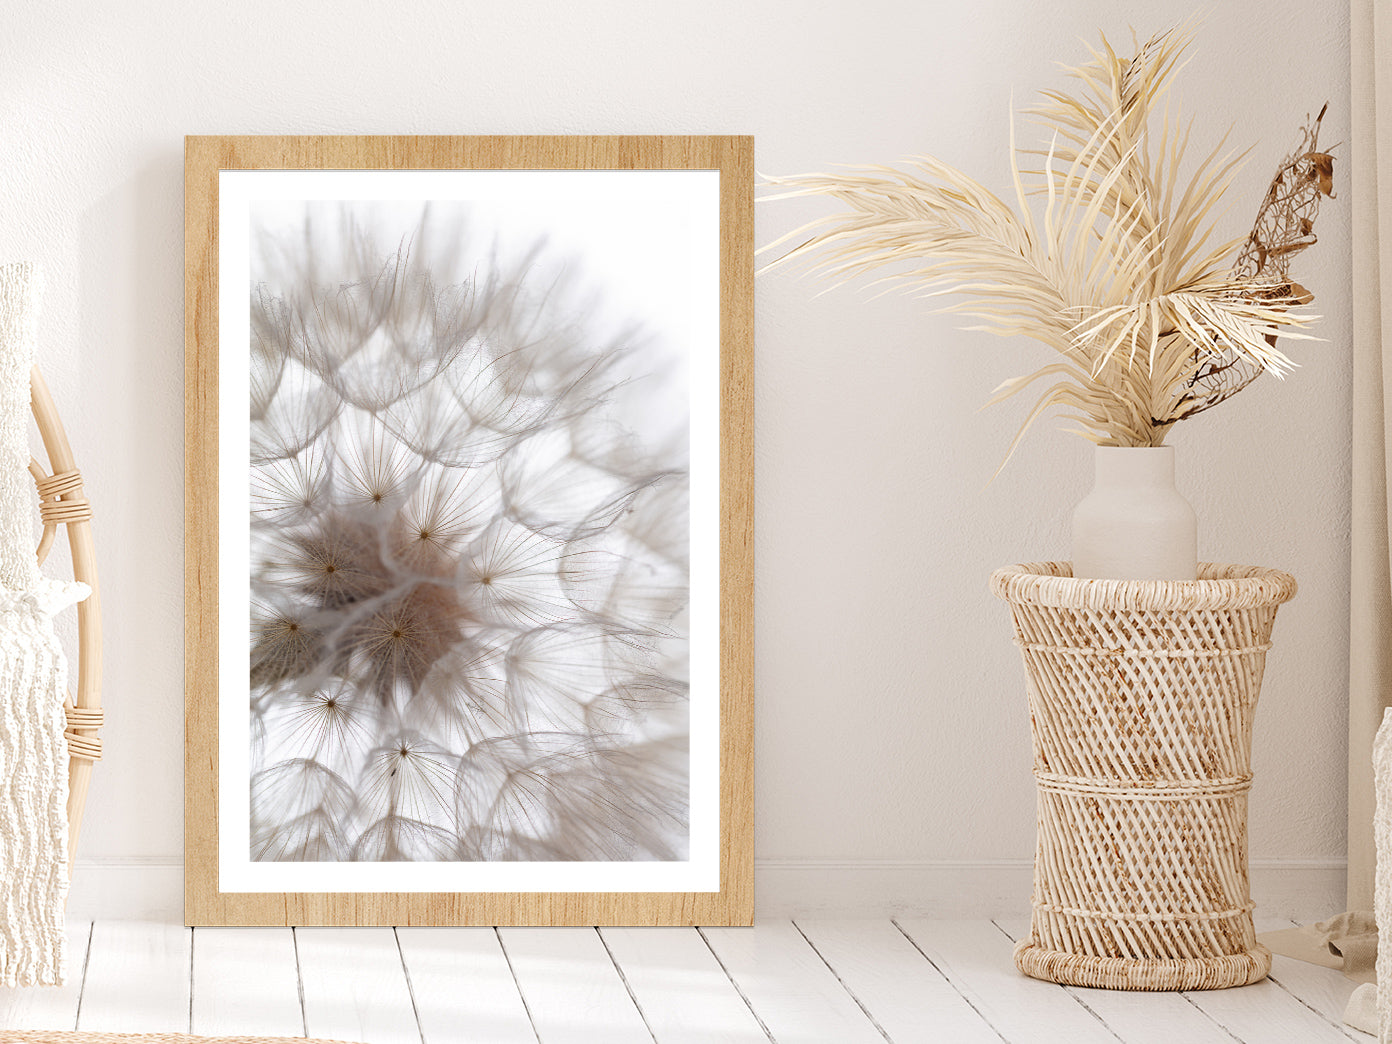 Dandelion Macro Flower Abstract Glass Framed Wall Art, Ready to Hang Quality Print With White Border Oak